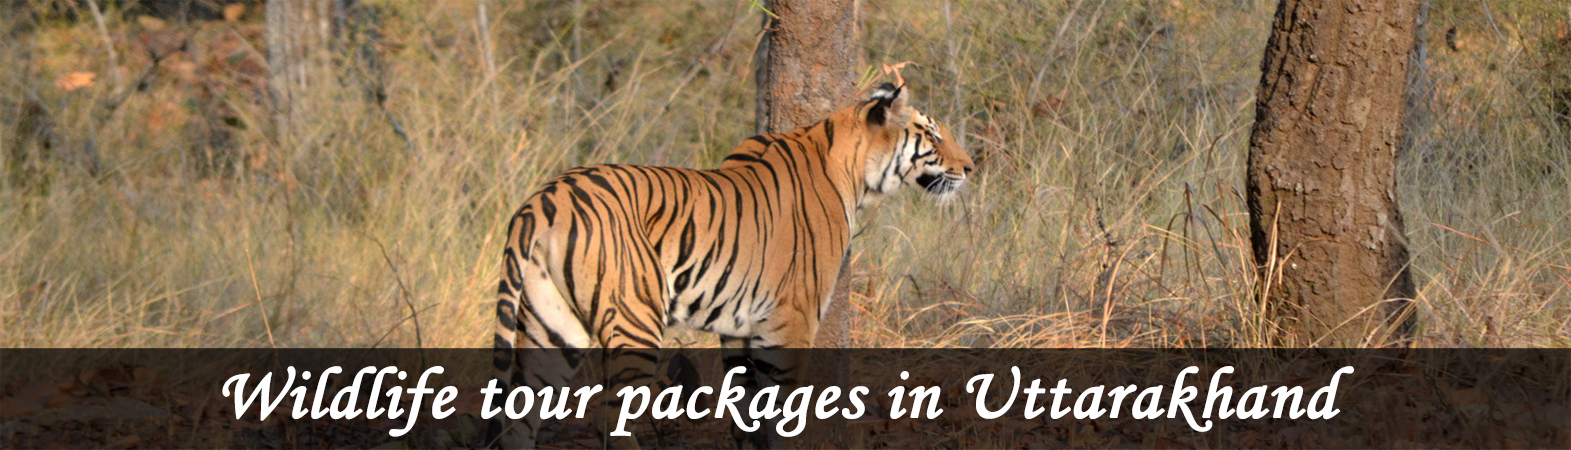 Wildlife tour packages in Uttarakhand and Wildlife packagee tour from Haridwar